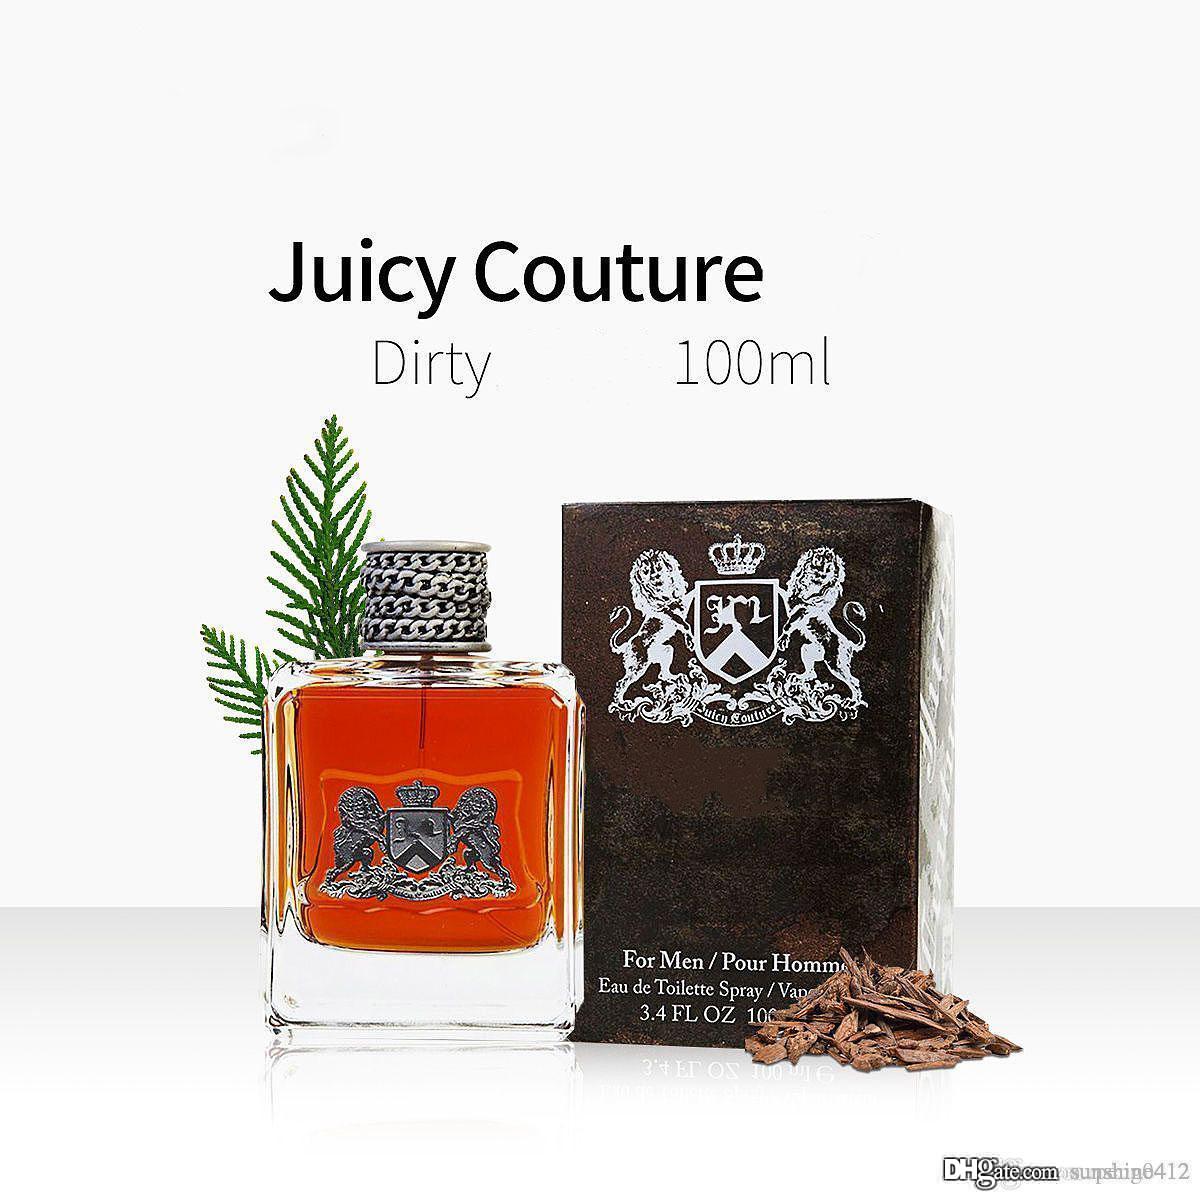 

men perfume cologne parfum Perfumer Couture dirty mens fragrance perfumes long lasting Spicy woody notes fragrances EDT 100ml US DHL free de